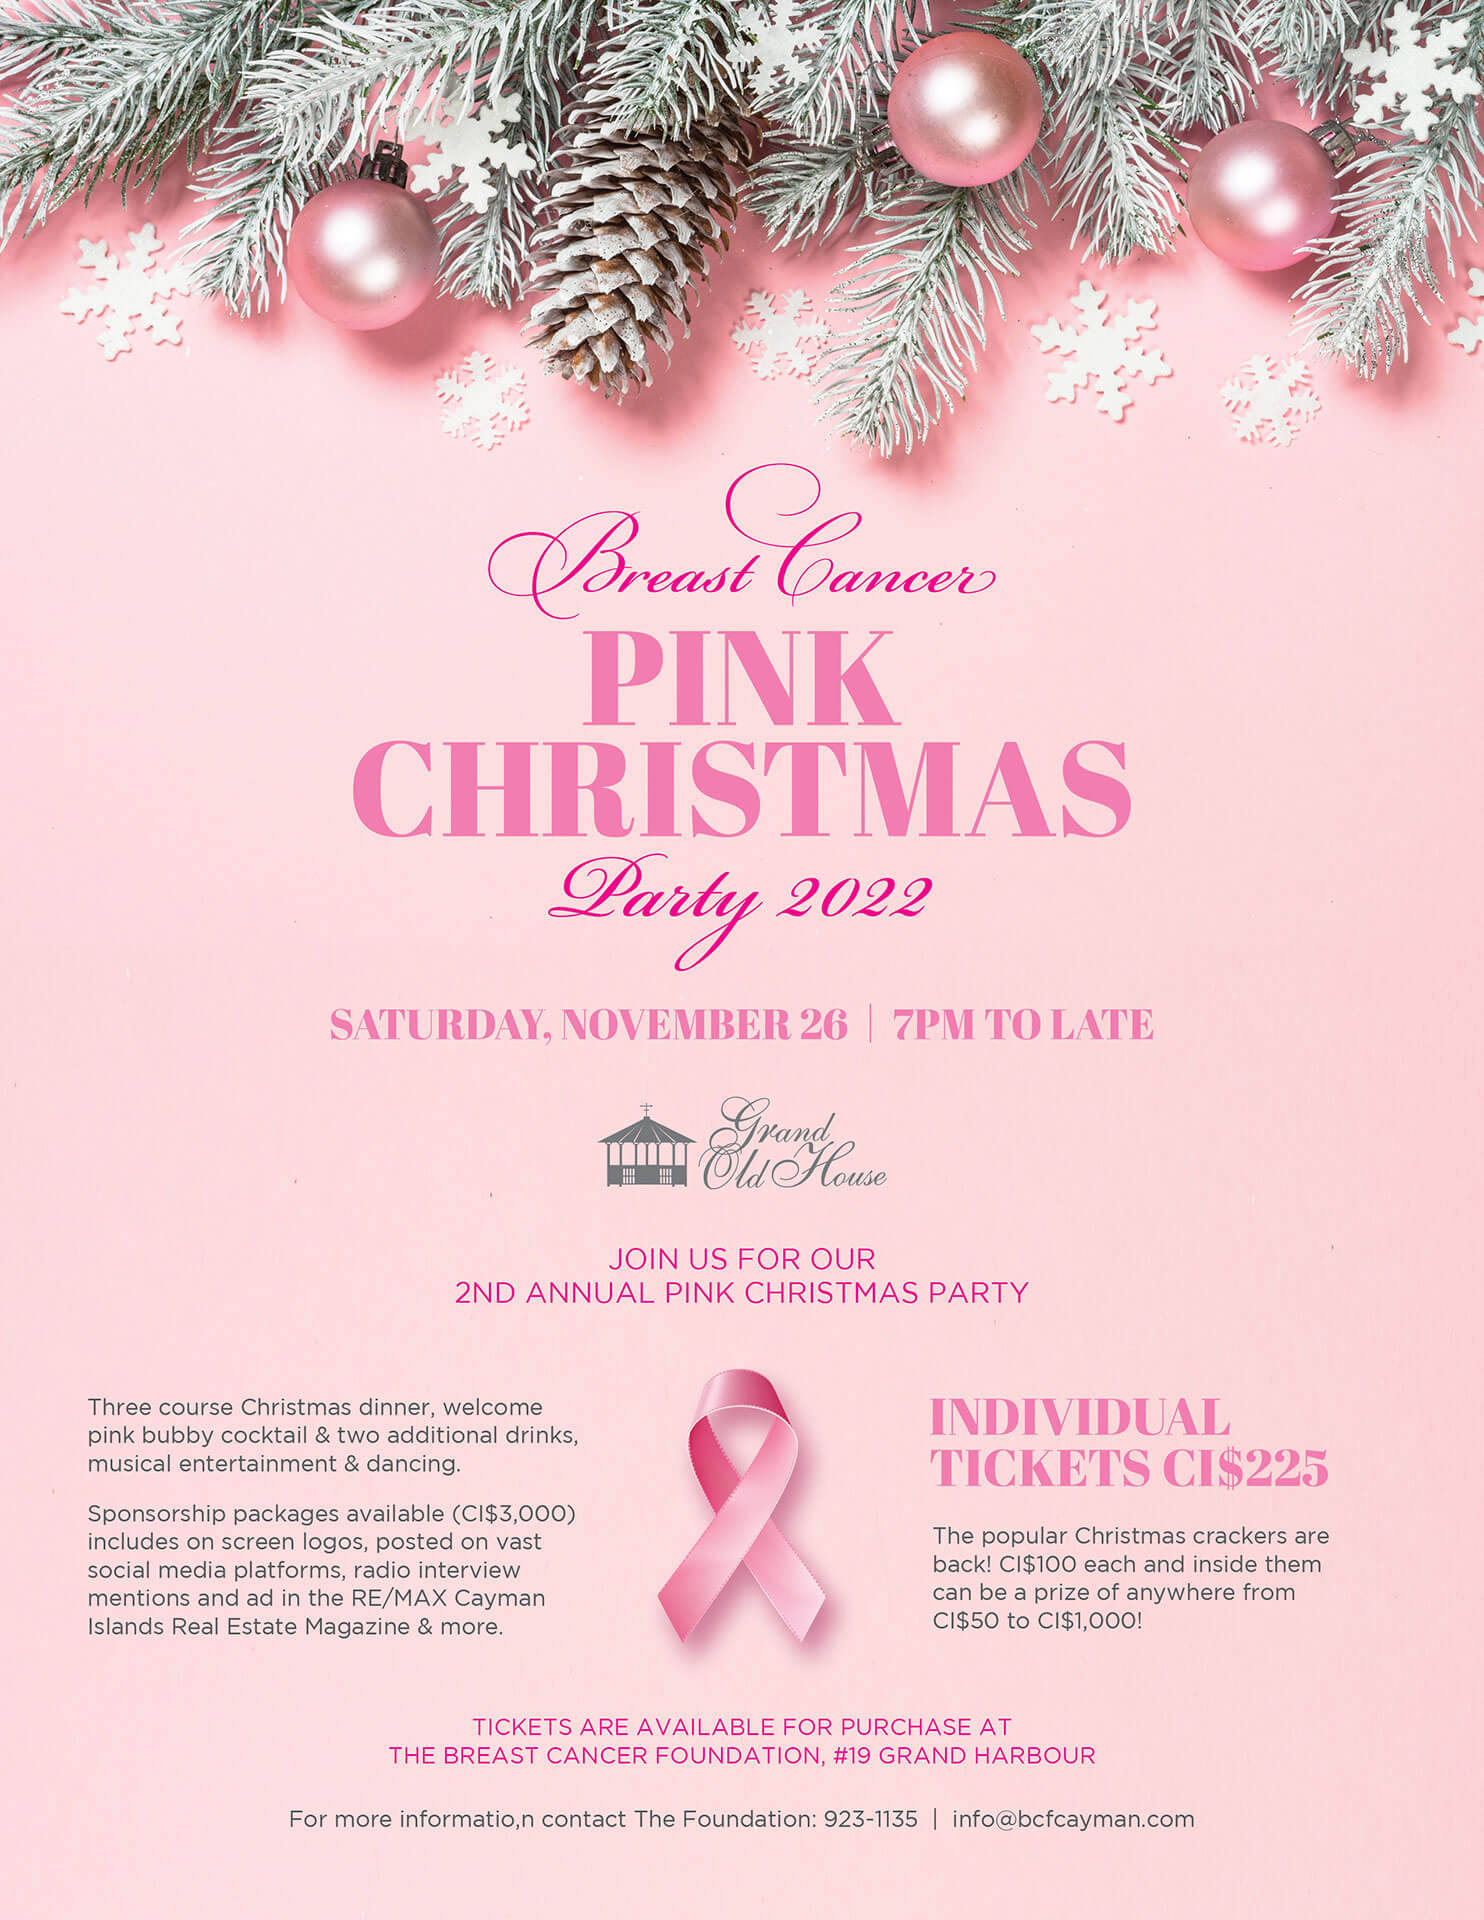 The Breast Cancer Foundation Pink Christmas Party